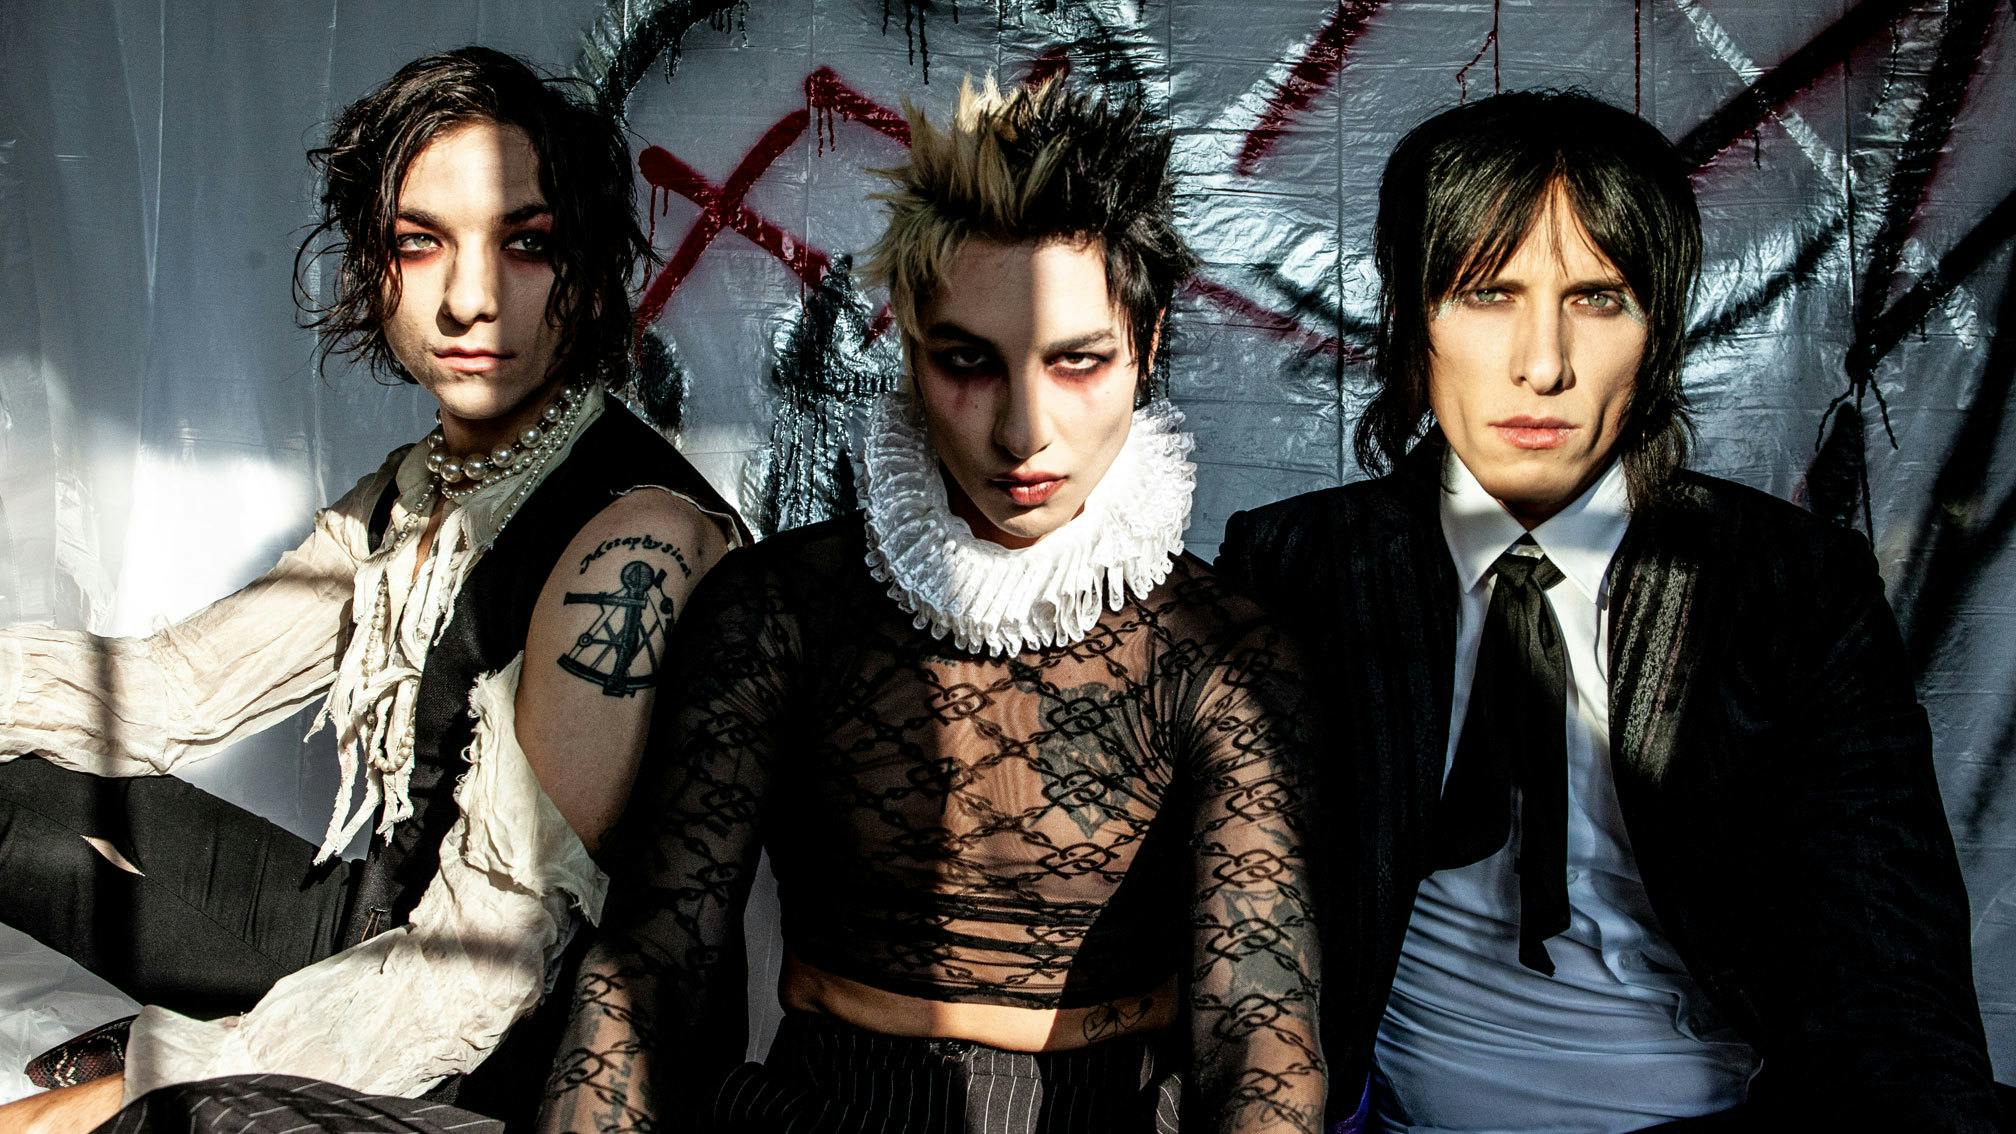 Palaye Royale have released an emotional new single, Broken